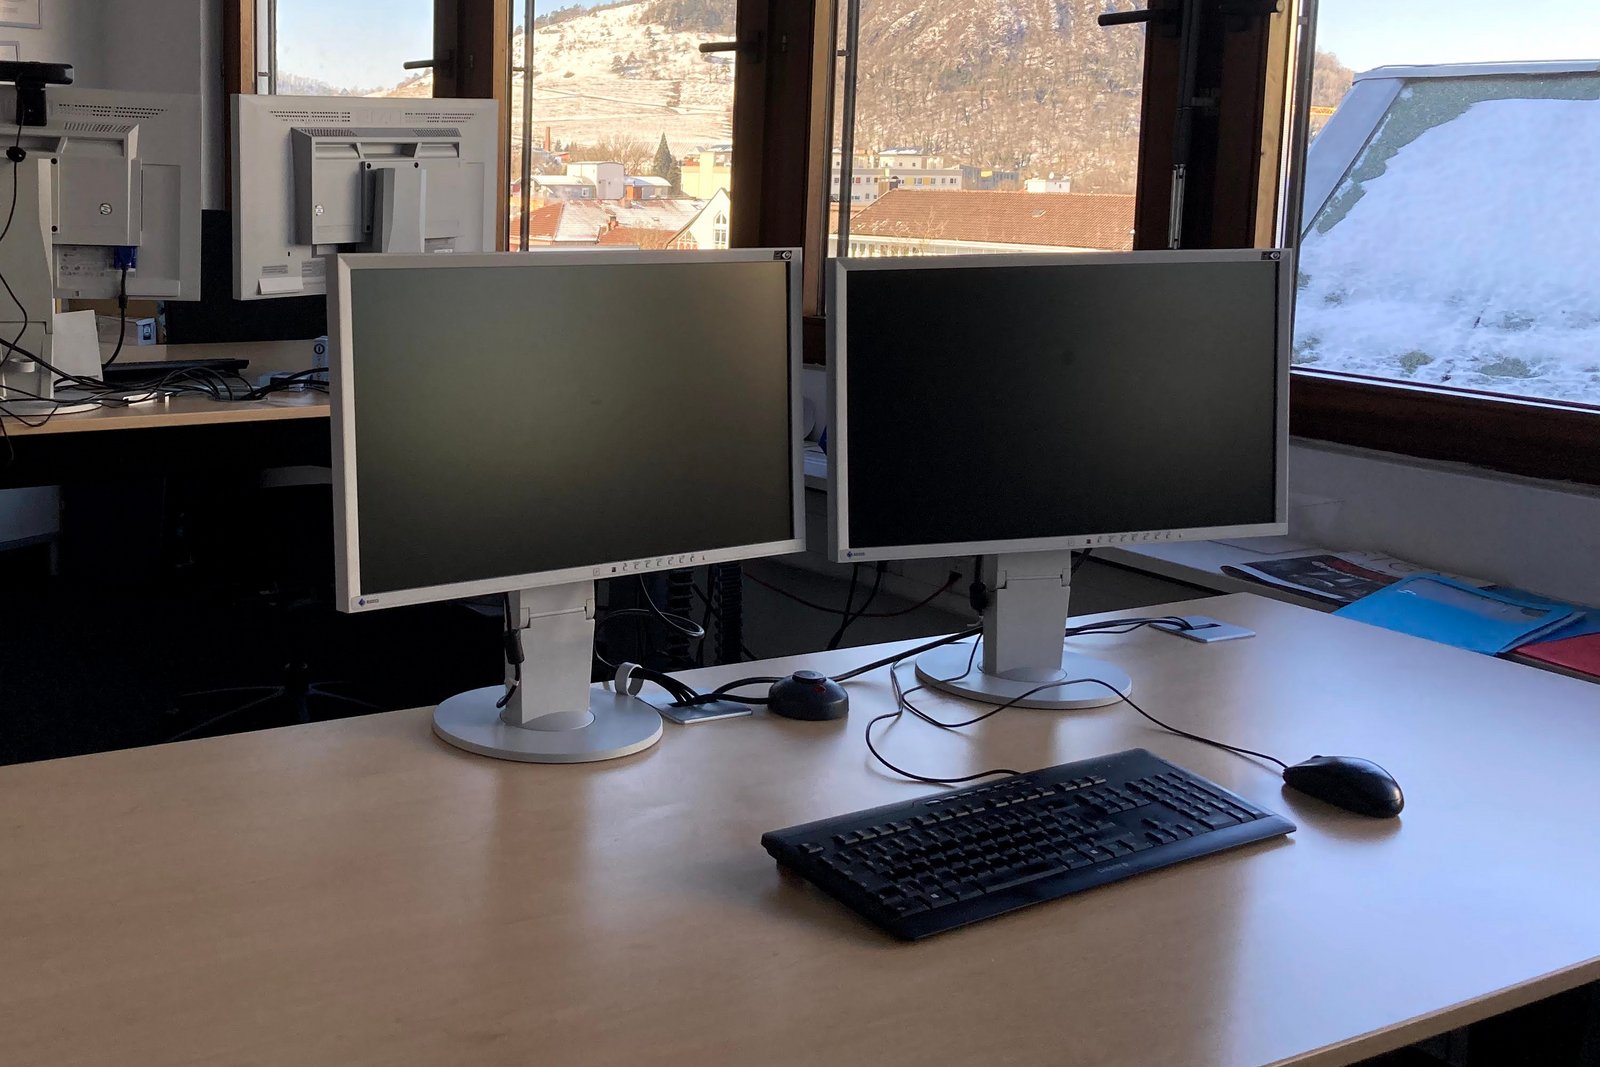 Typical workstation at Vinergy with 2 screens